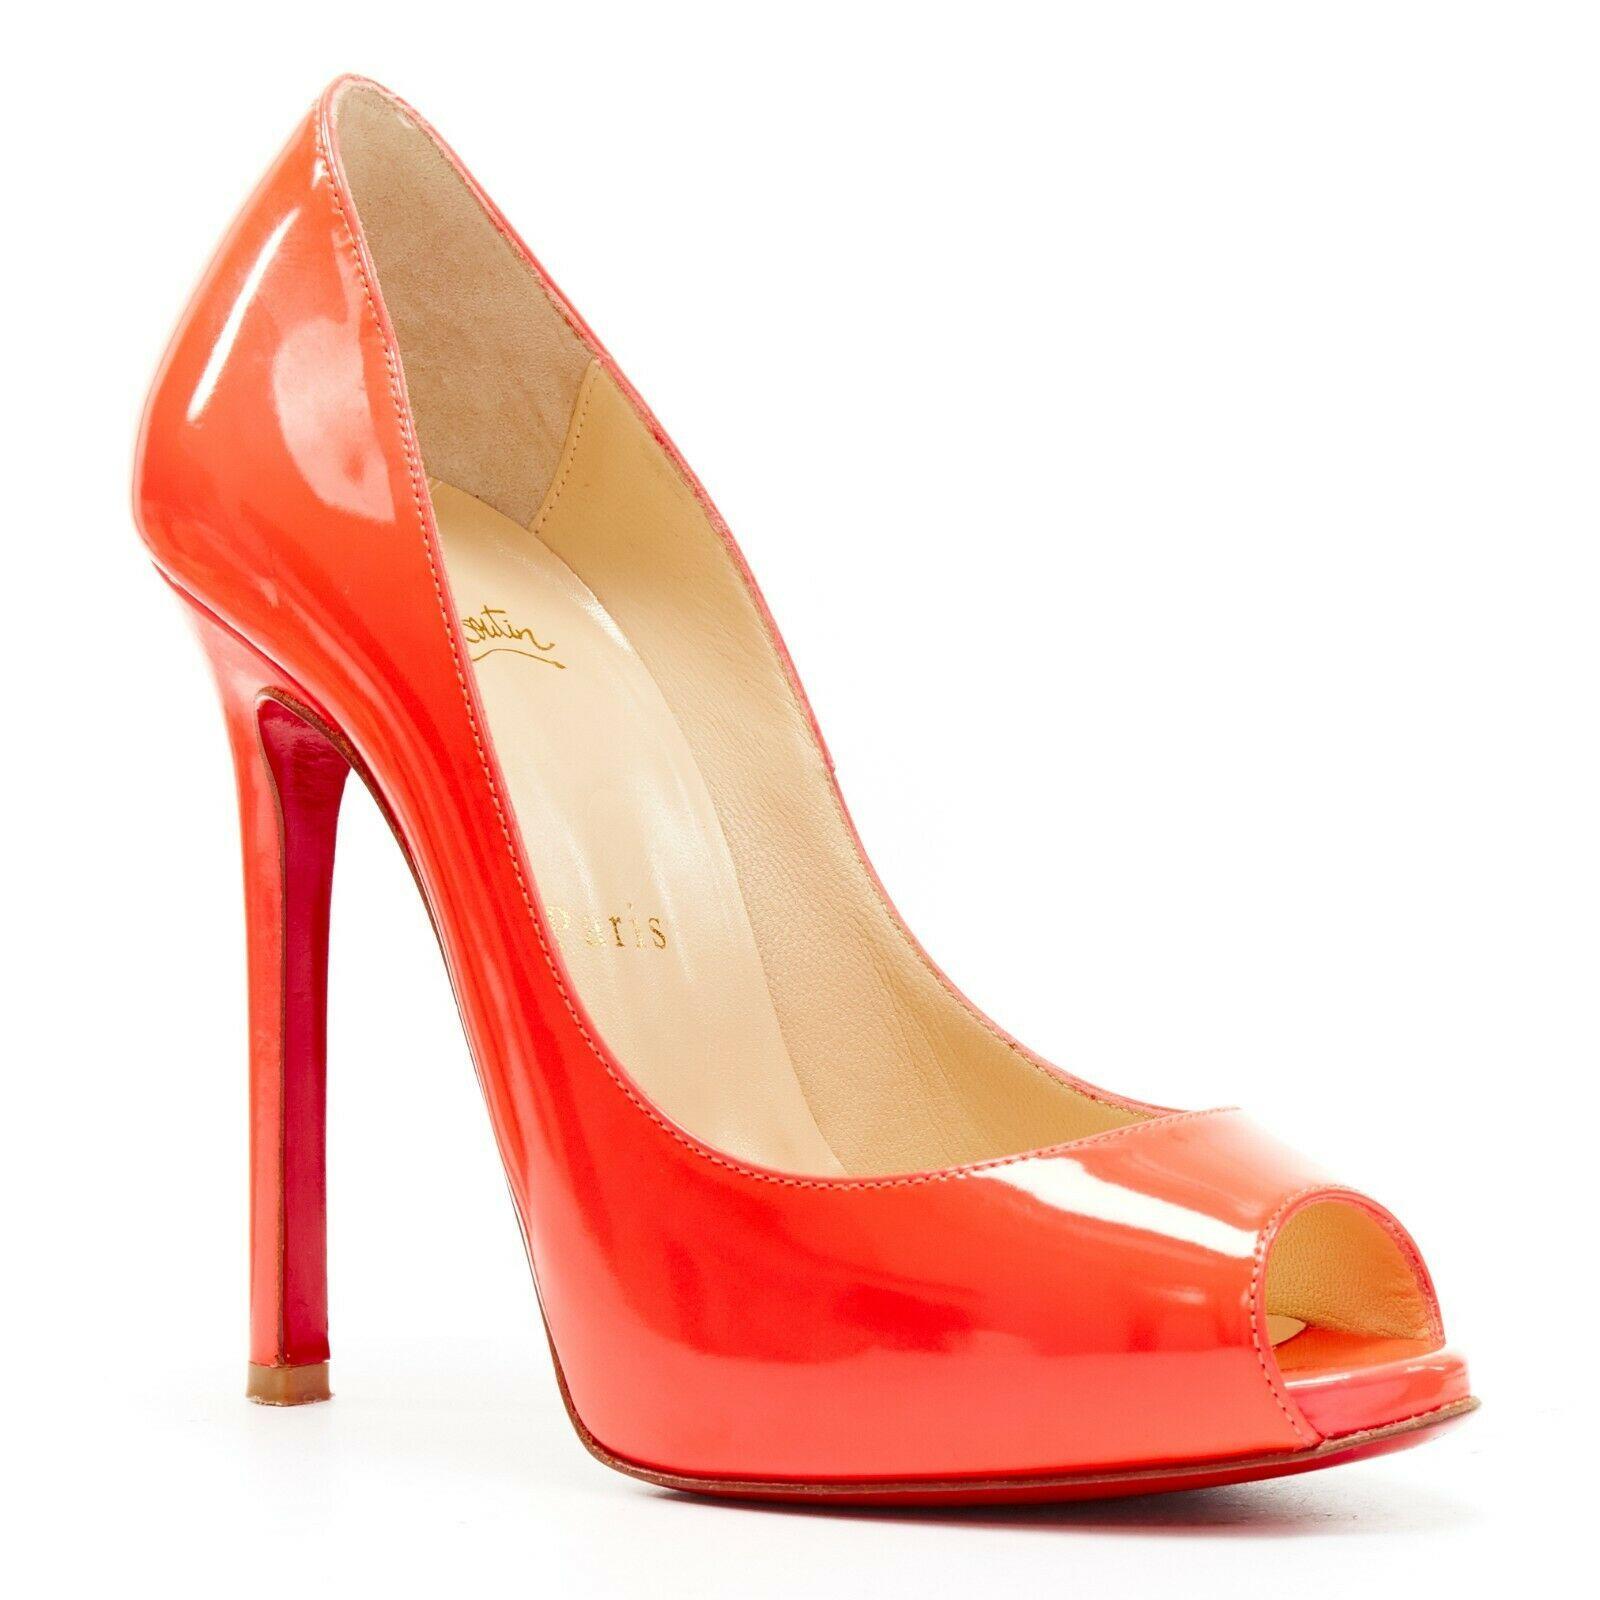 CHRISTIAN LOUBOUTIN neon shocking pink patent peep toe platform heel EU35.5
CHRISTIAN LOUBOUTIN
Shock pink neon patent leather upper. 
Tonal stitching. 
Peep toe. 
Concealed platform sole. 
Slim high heel. 
Covered heel. 
Padded tan leather lining.